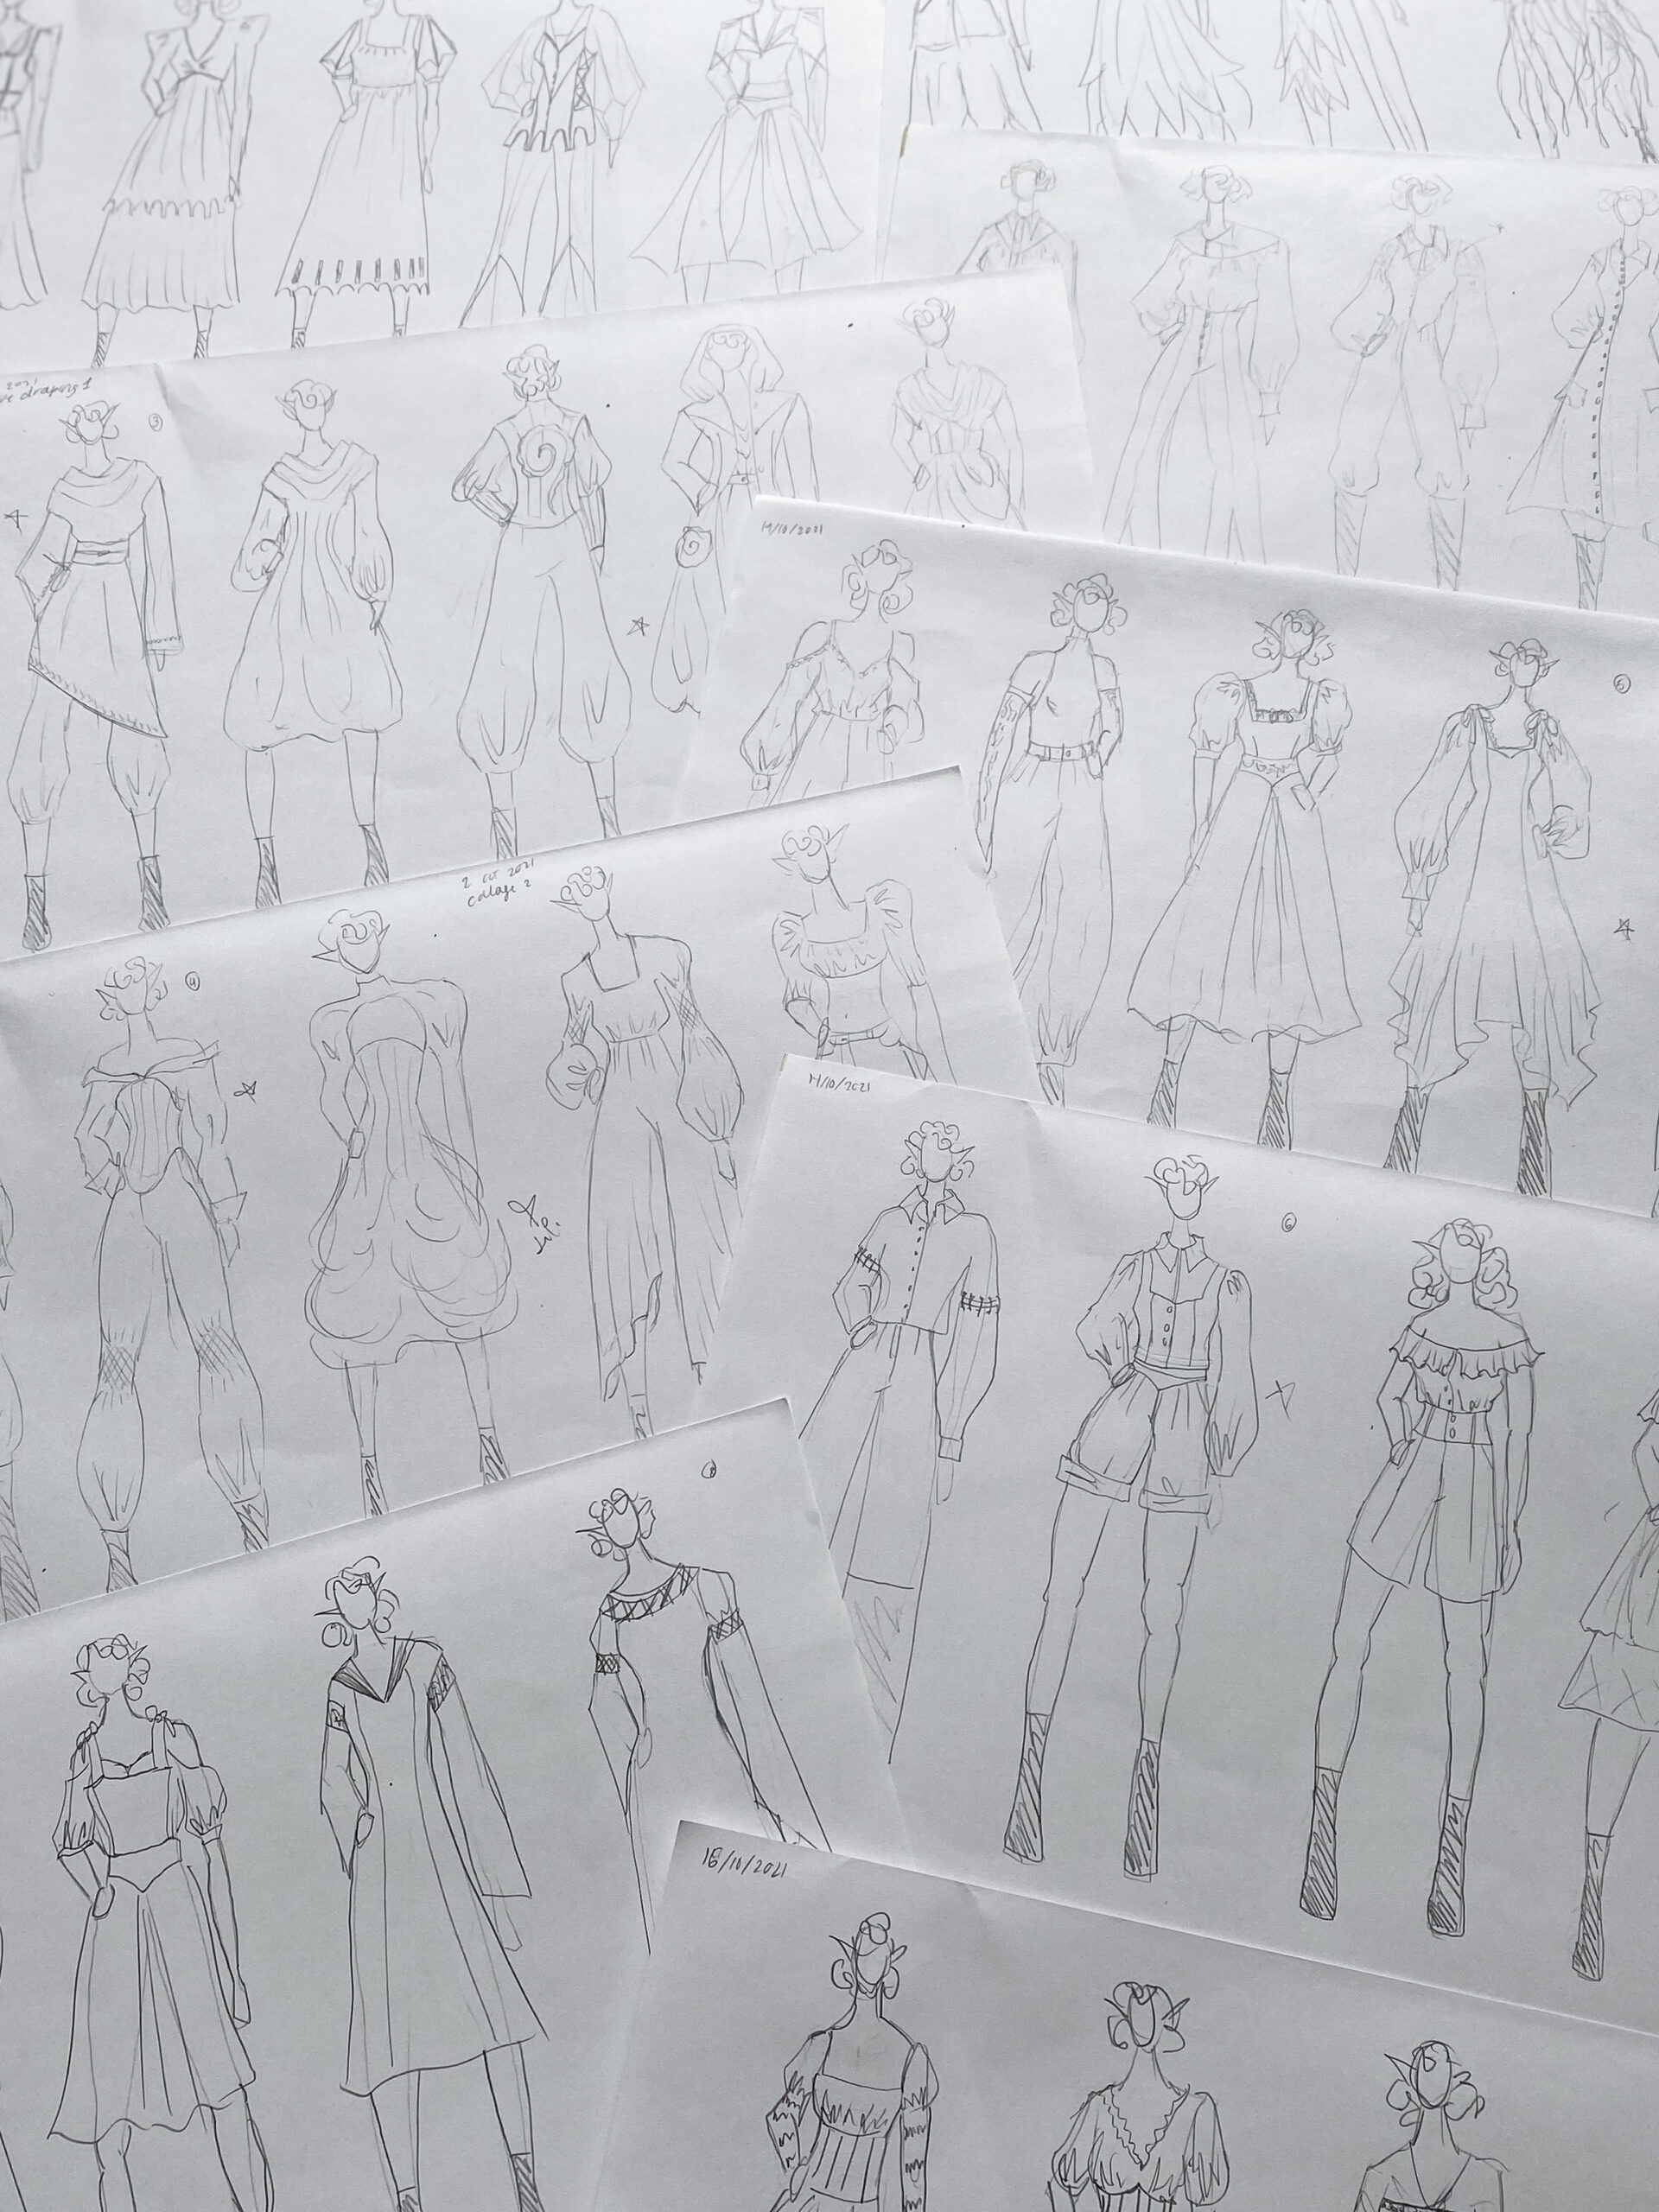 Ideation sketches created during the development phase of the collection.